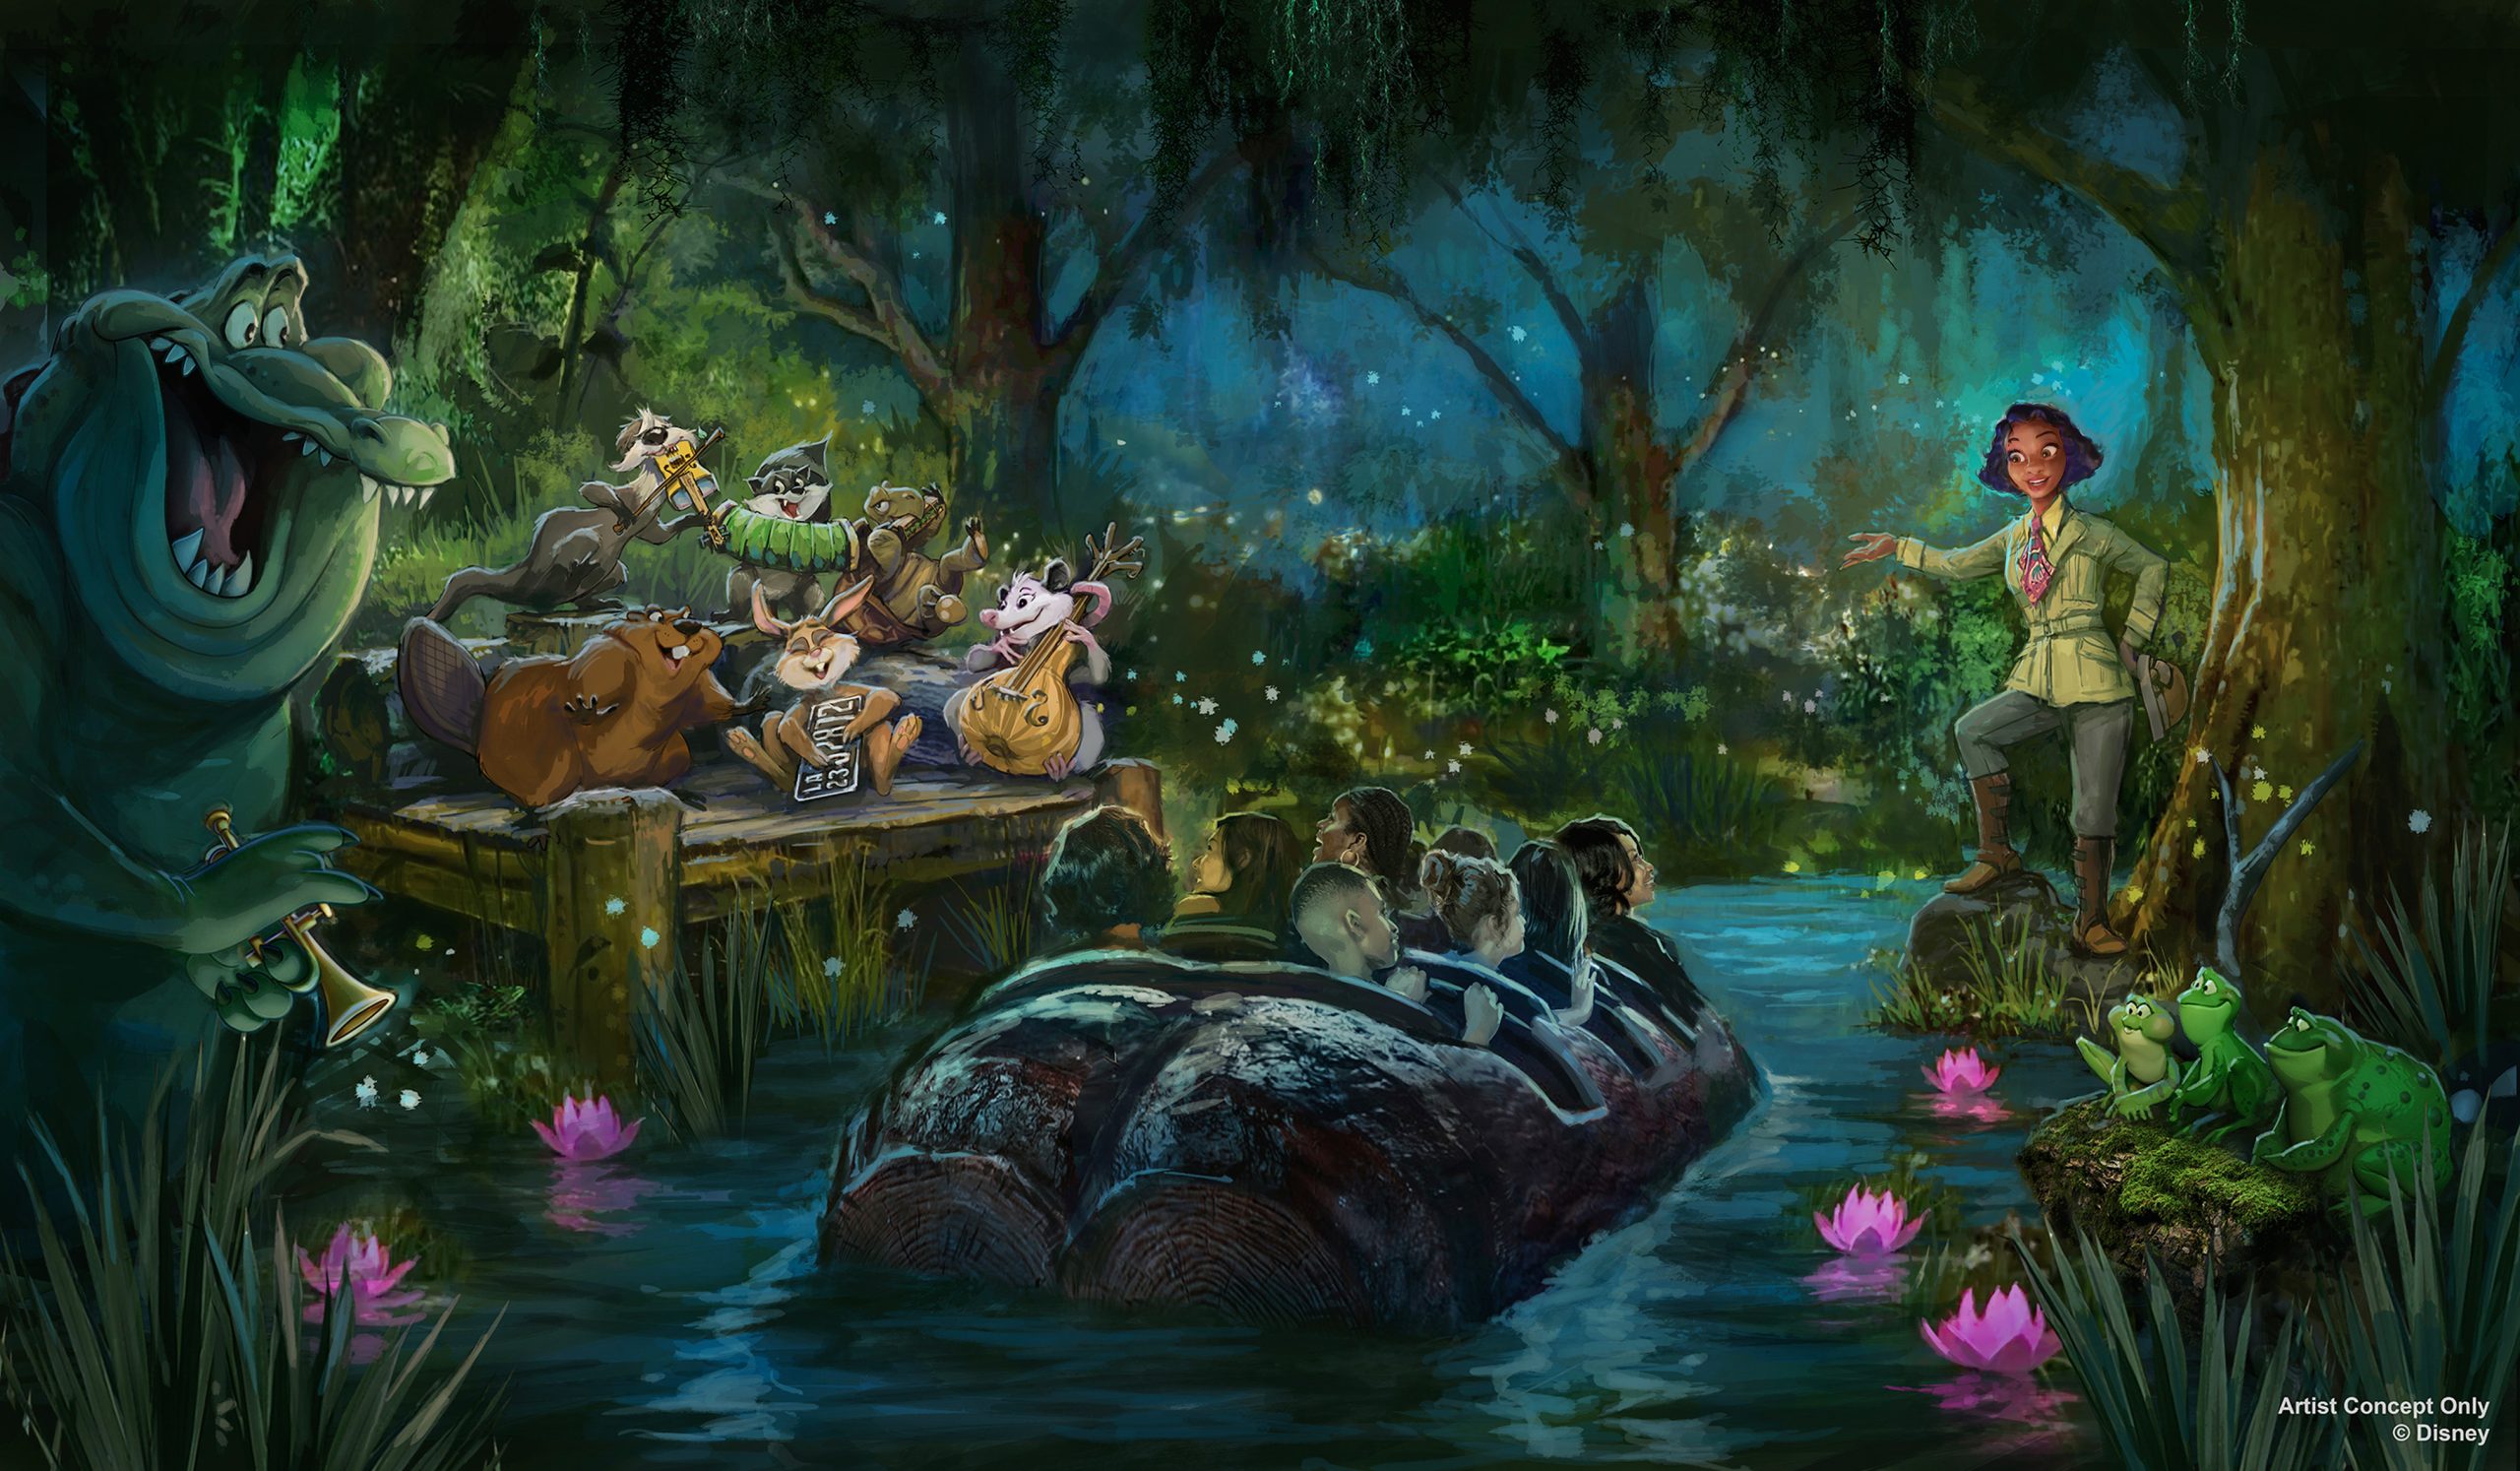 A first look at a new scene and some of the brand-new characters coming to Tiana’s Bayou Adventure. Tiana’s Bayou Adventure, coming to Magic Kingdom Park, Lake Buena Vista, Fla. and Disneyland Park, Anaheim, Calif., in 2024, will take guests on a musical adventure inspired by the beloved story and characters from the fan-favorite film. (Disney)